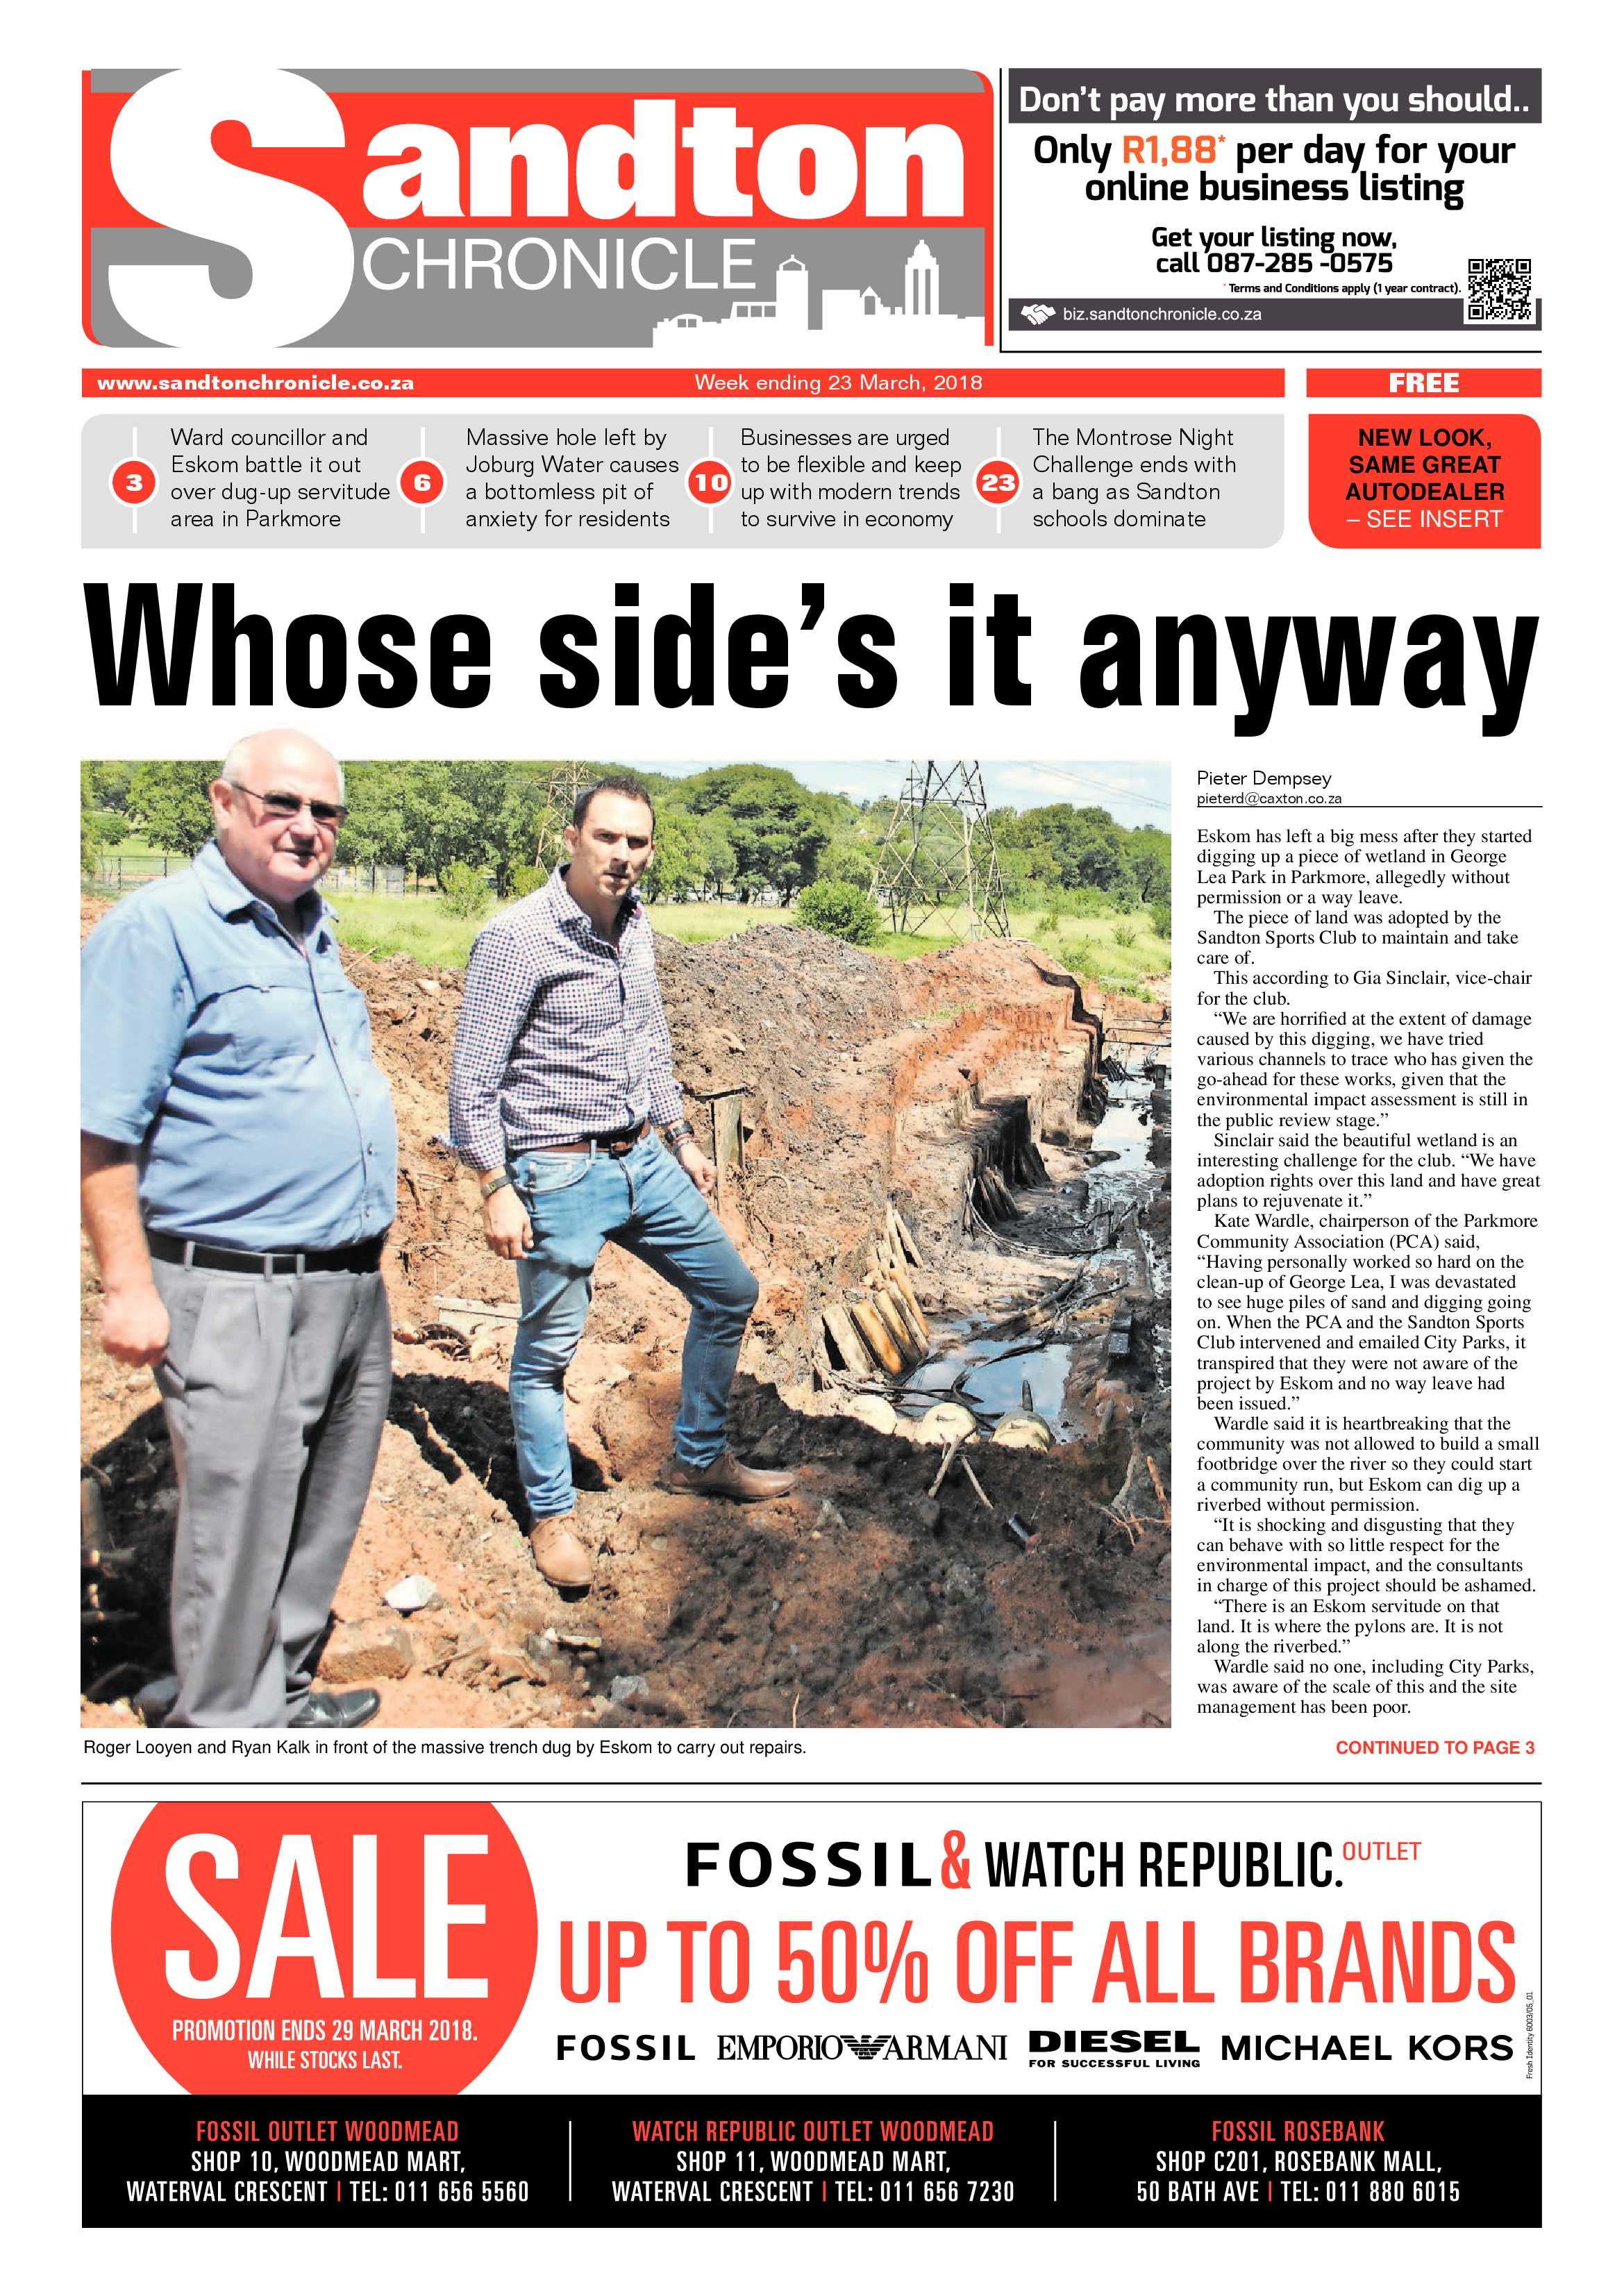 Sandton Chronicle 23 March 2018 page 1